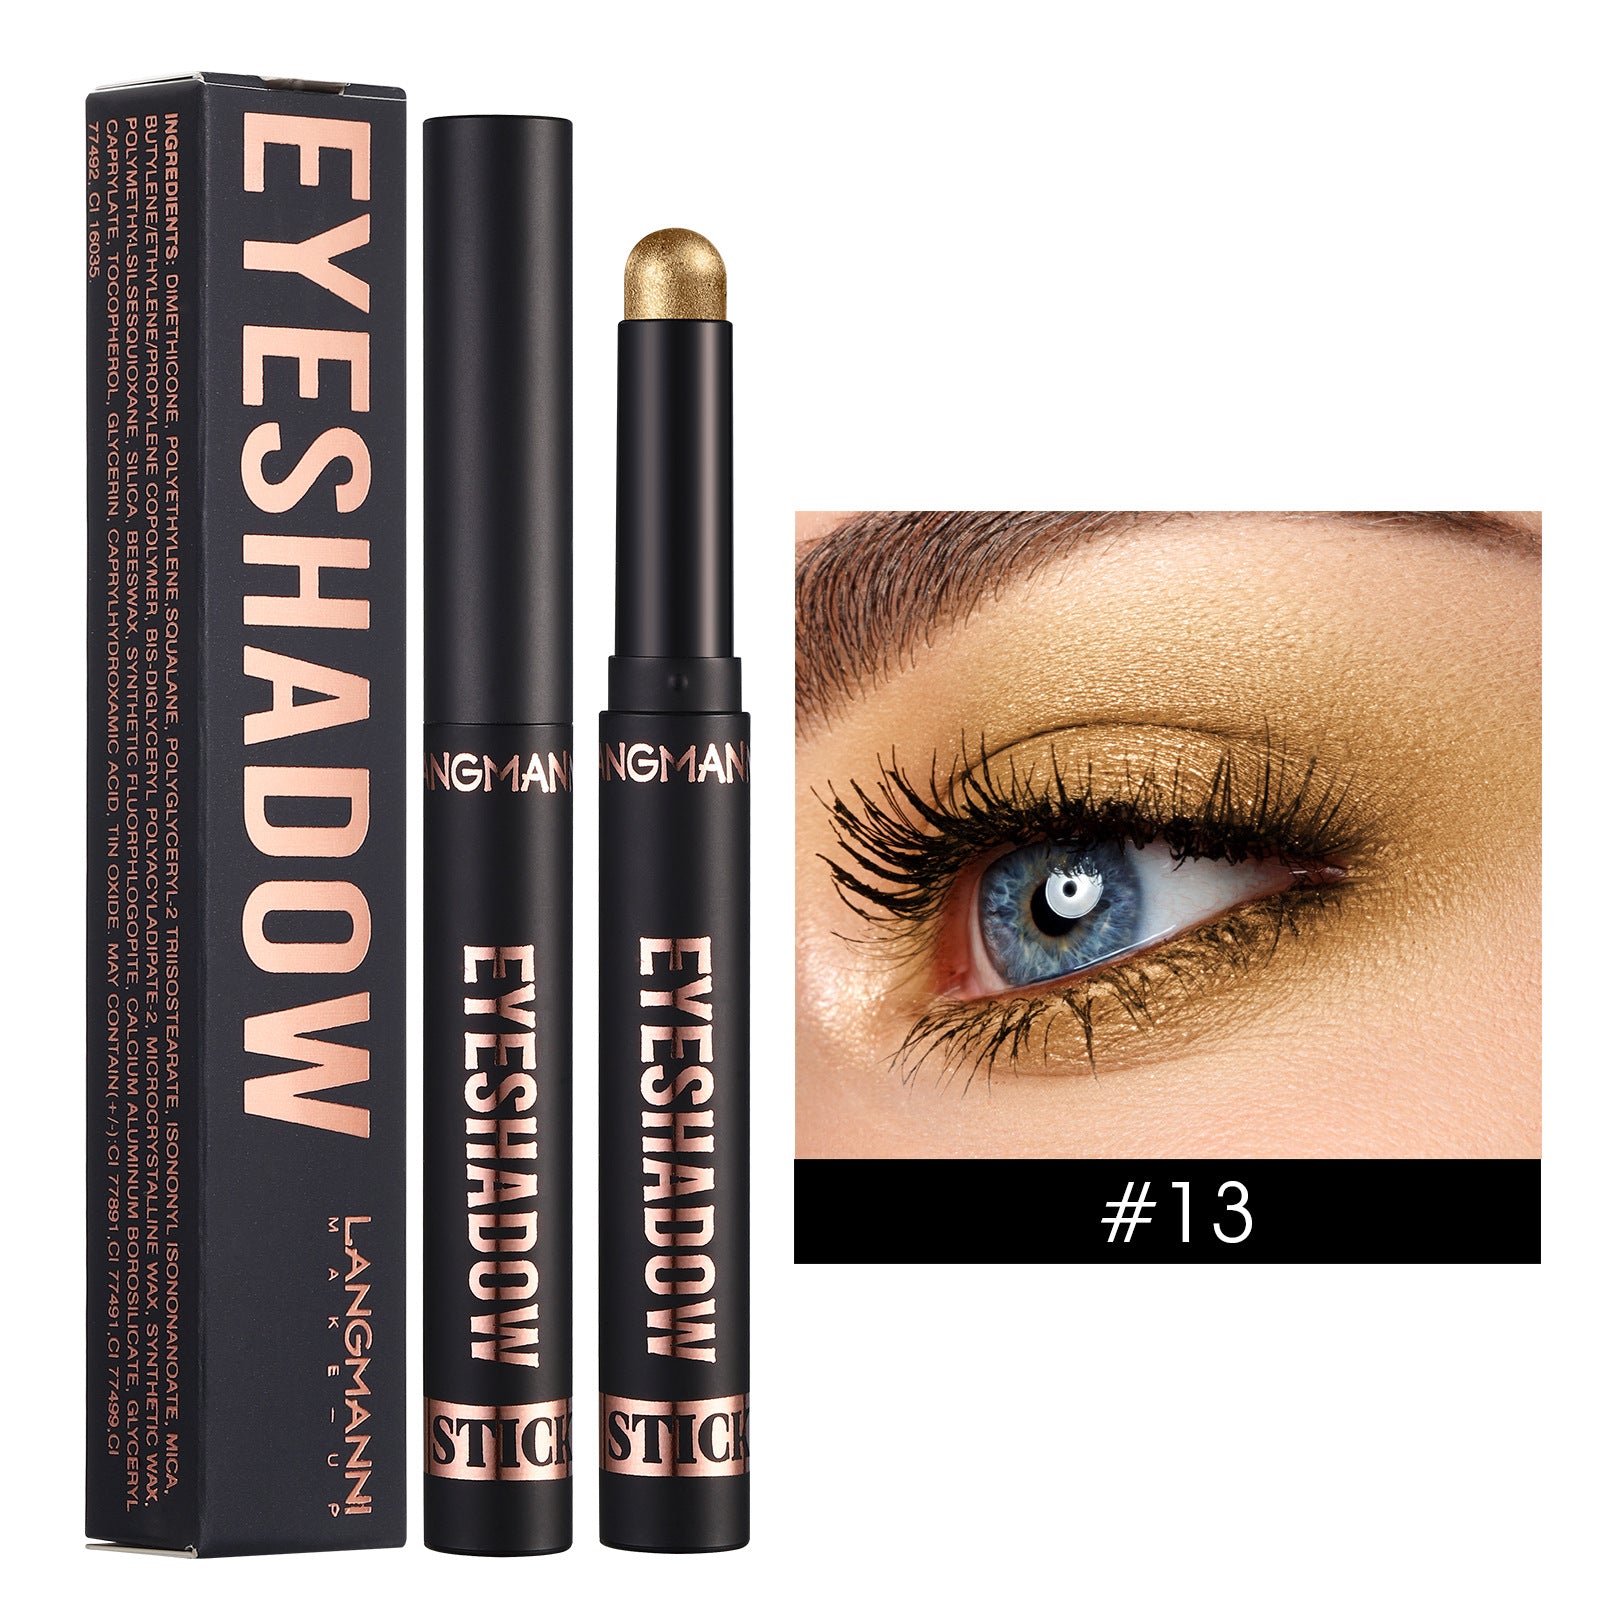 Eye Shadow Stick Waterproof And Durable Hot Sale Smudges Shimmer Matte - Beuti-Ful